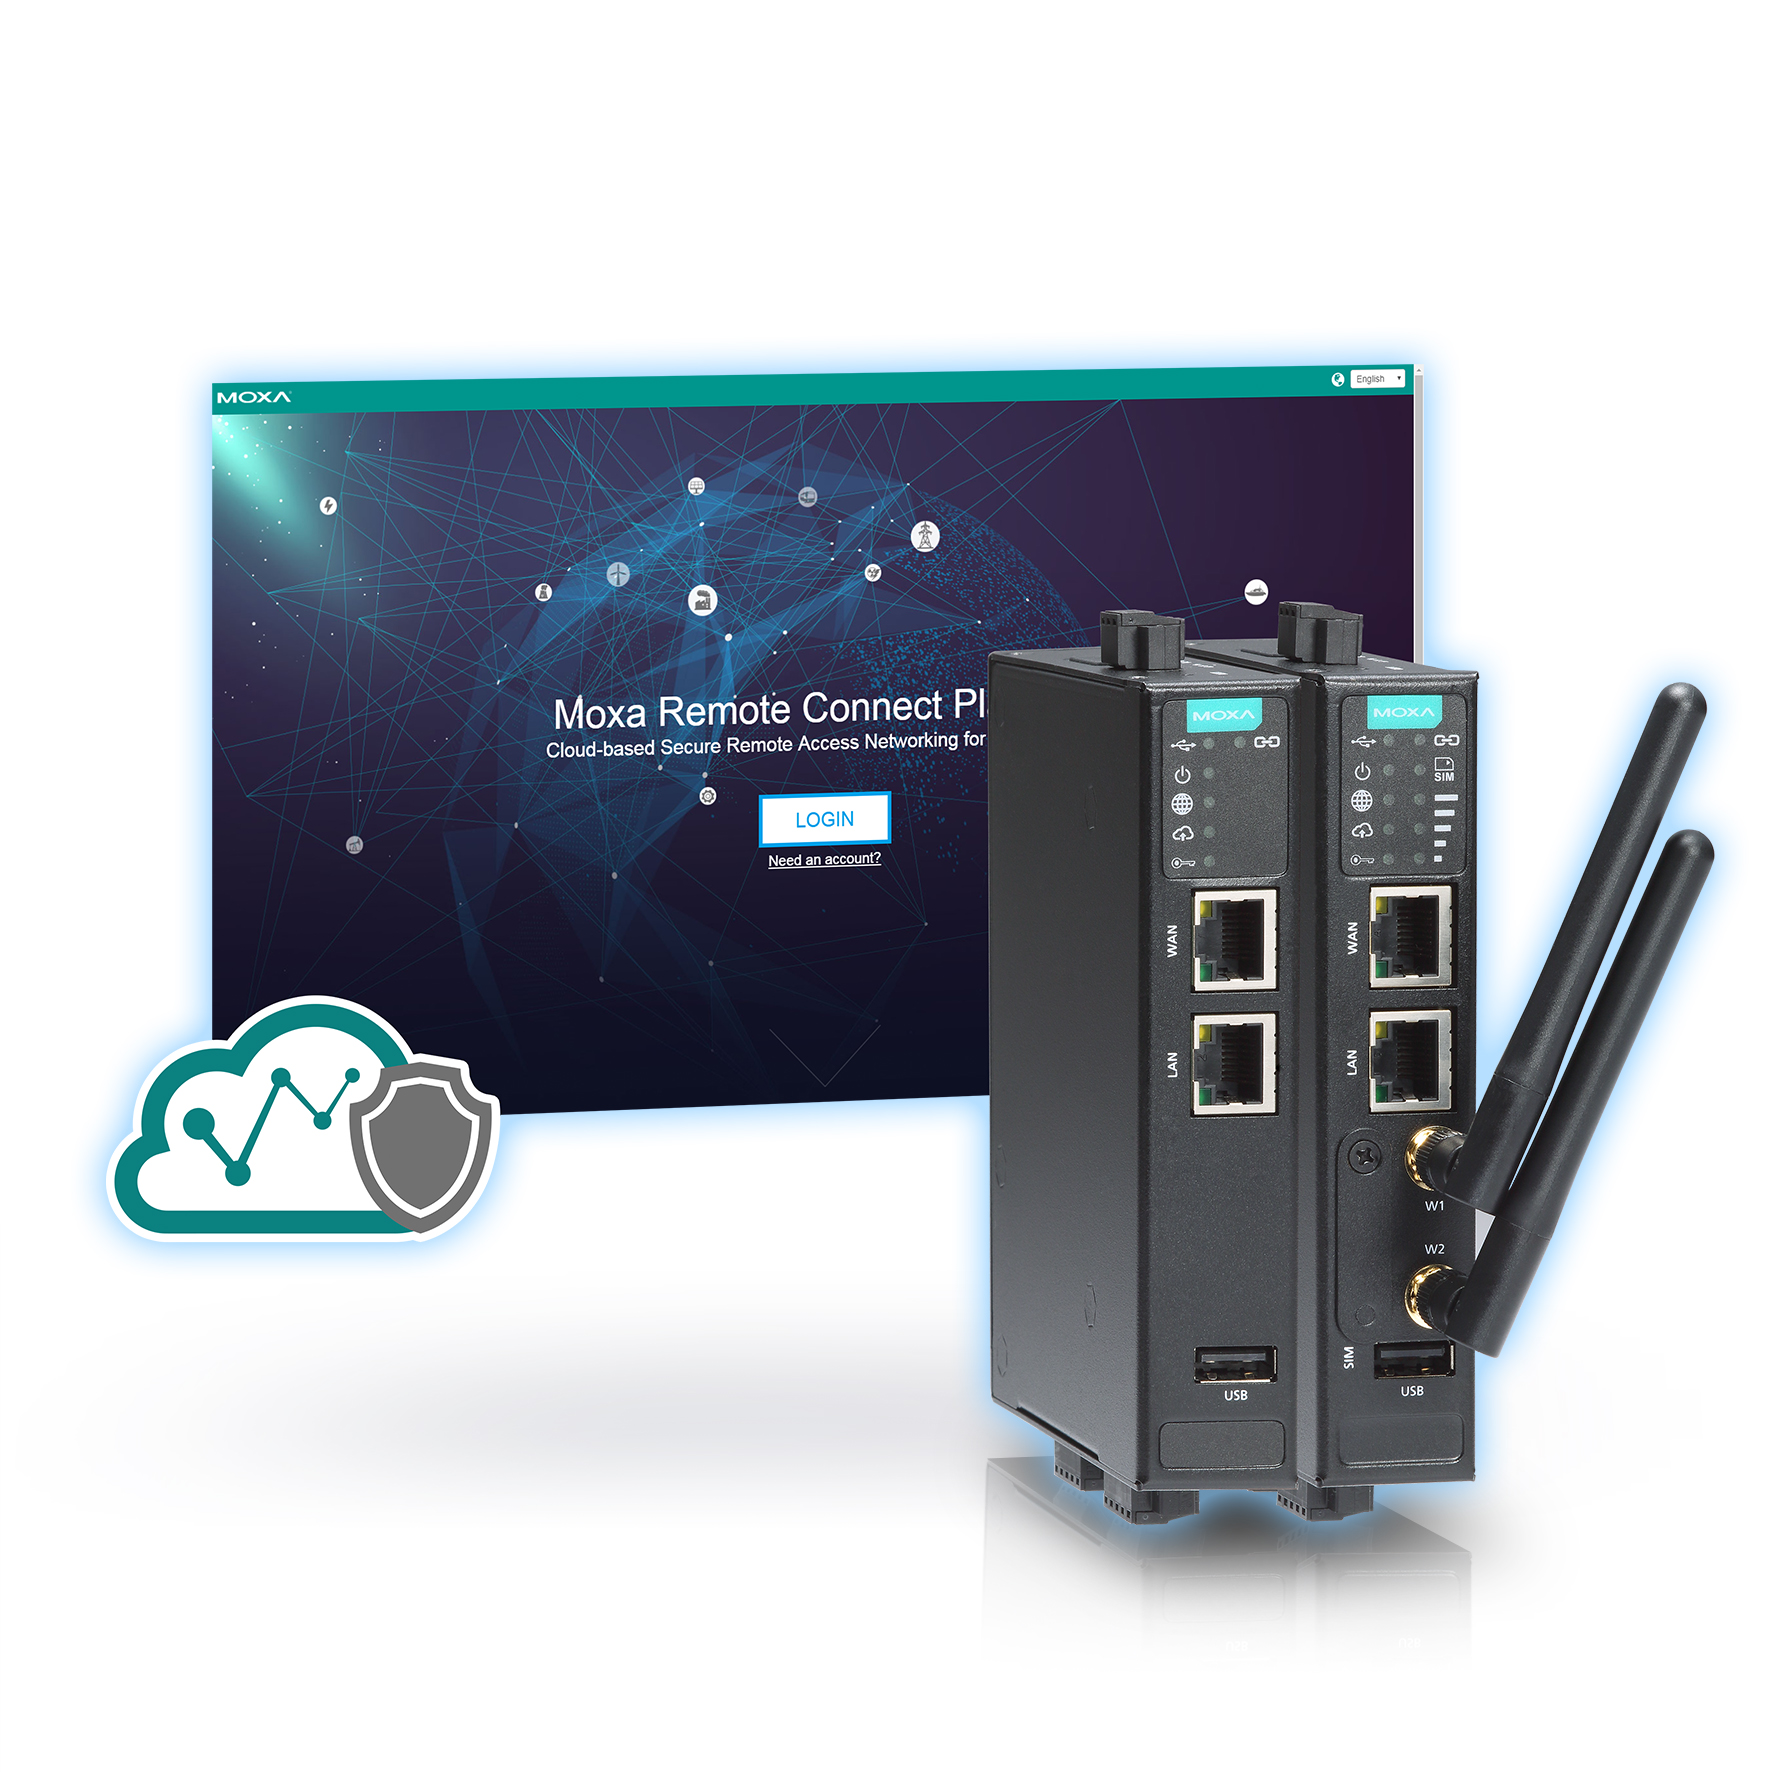 Cloud-based Secure Remote Access Solution Designed for Effortless Connection to IoT Devices